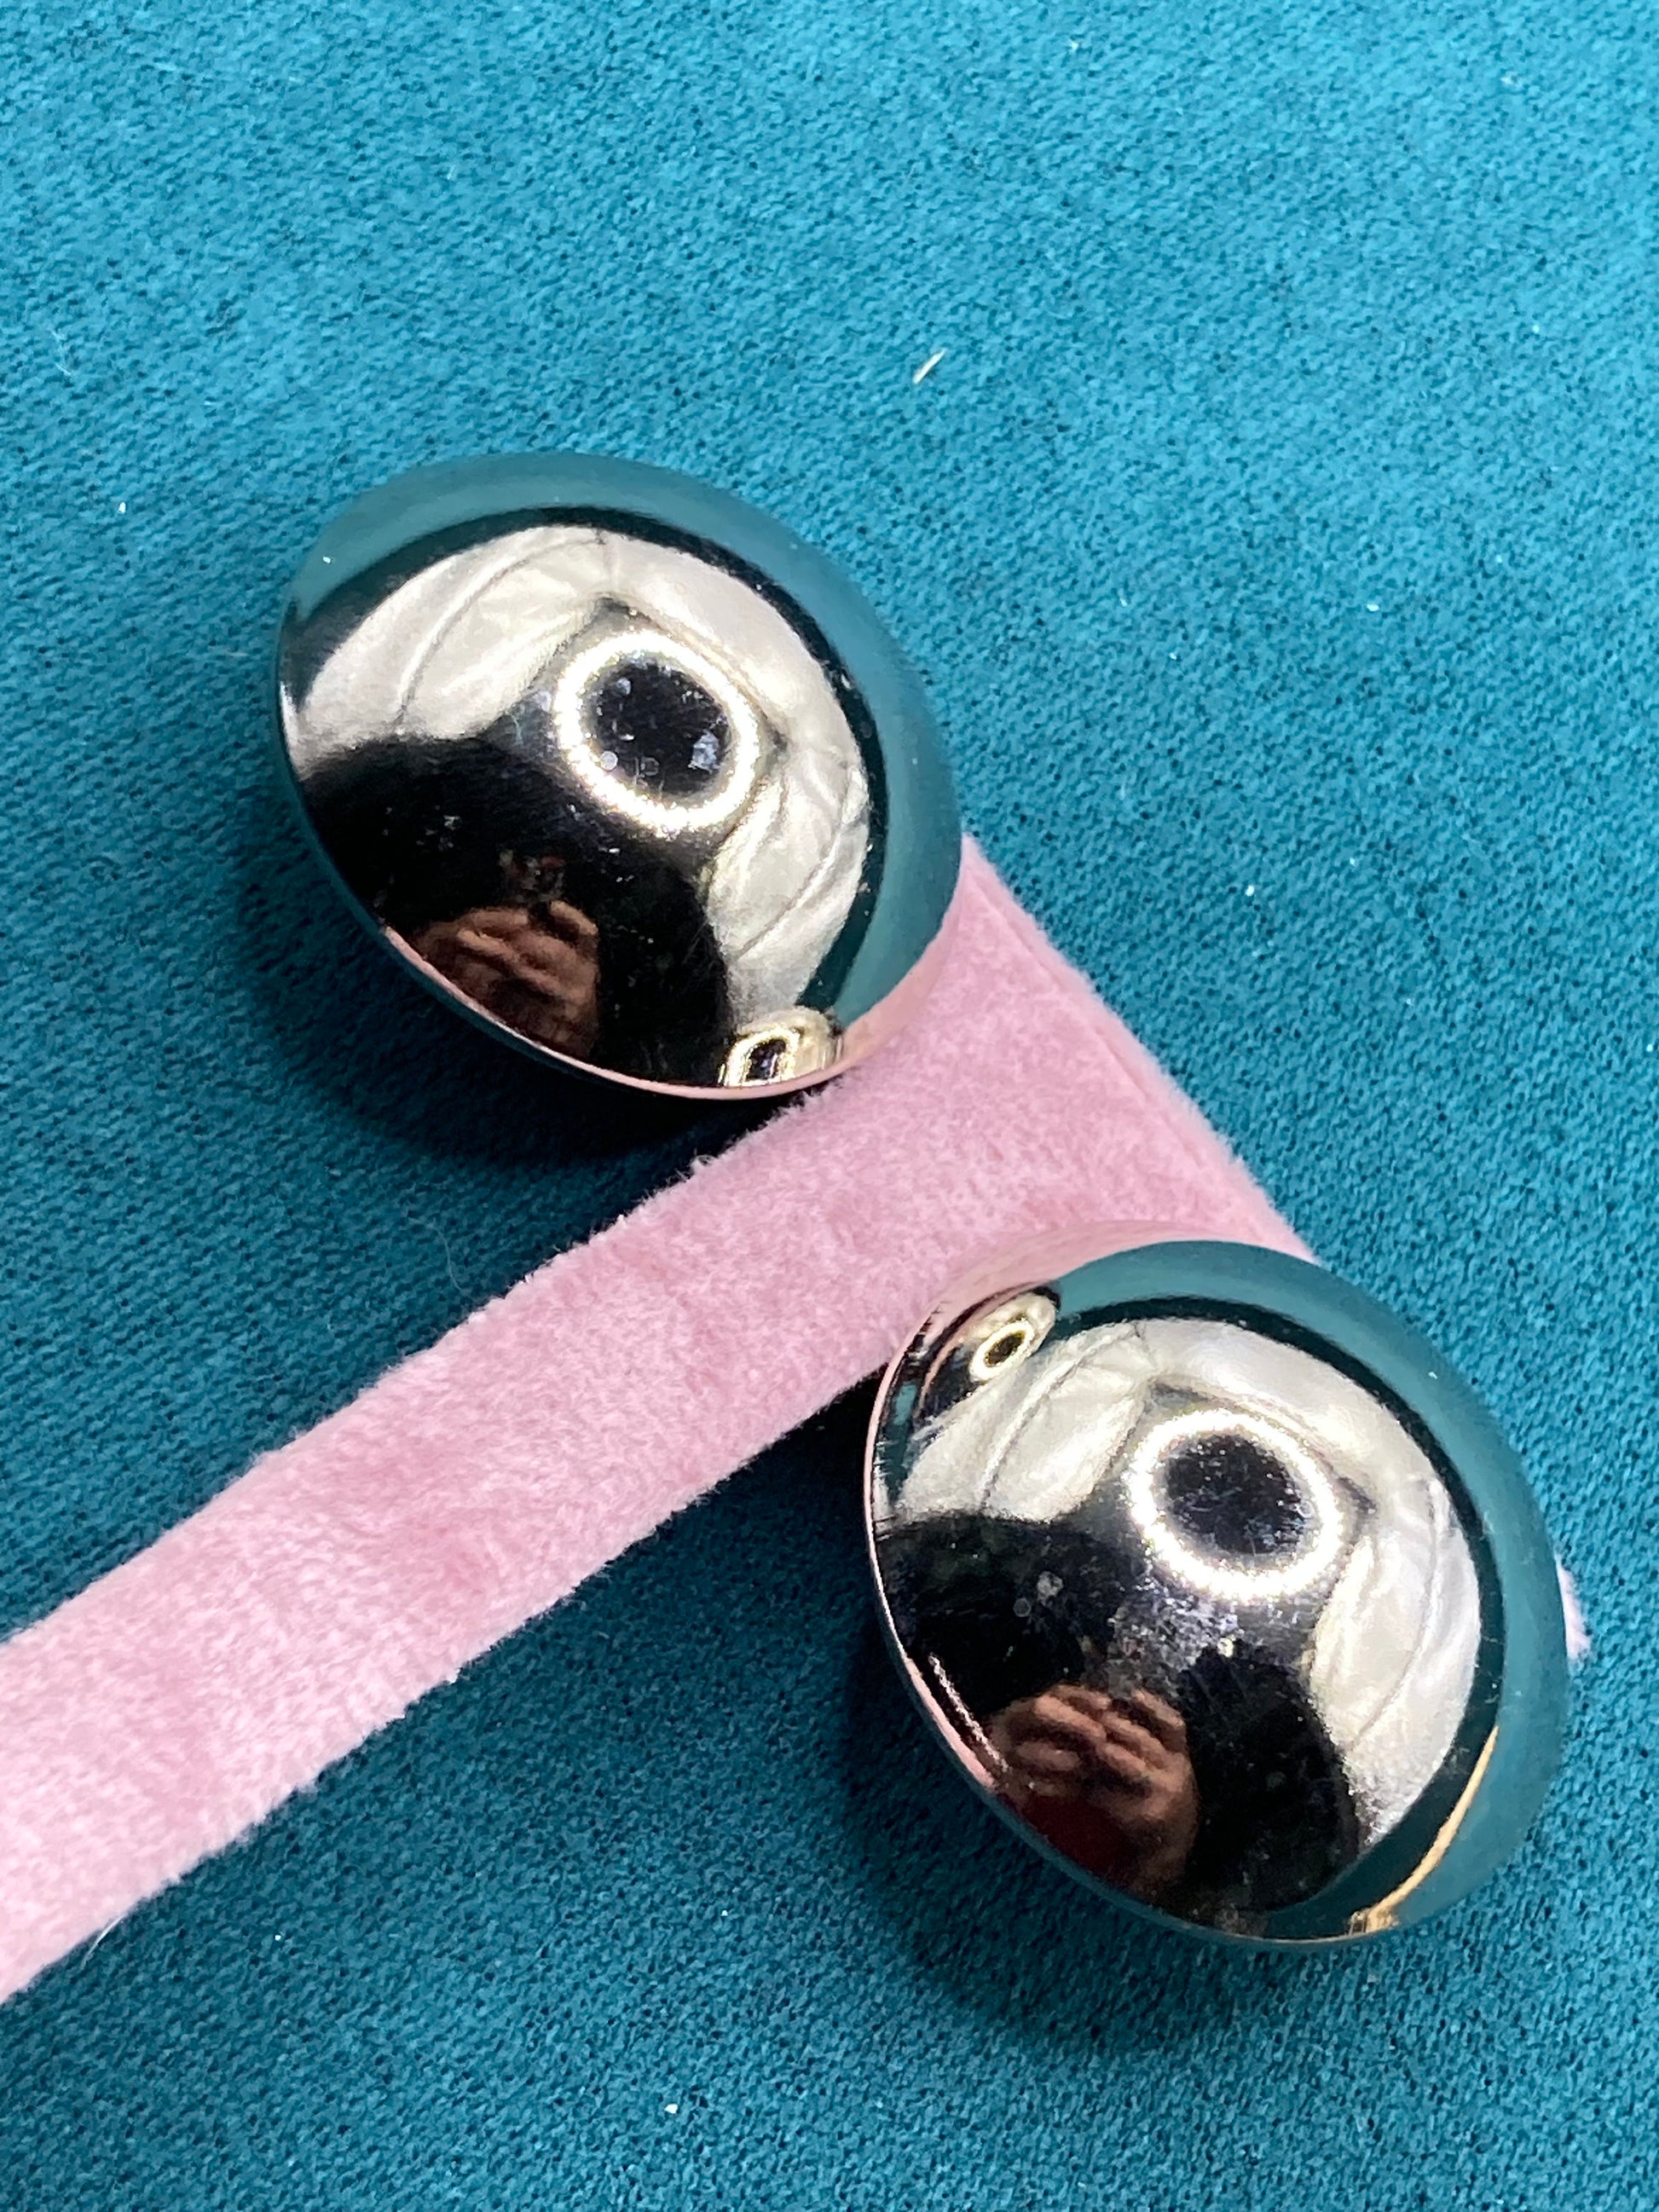 True vintage pristine oversized Silver High sheen metal 2.5cm high dome earrings genuine period old shop stock